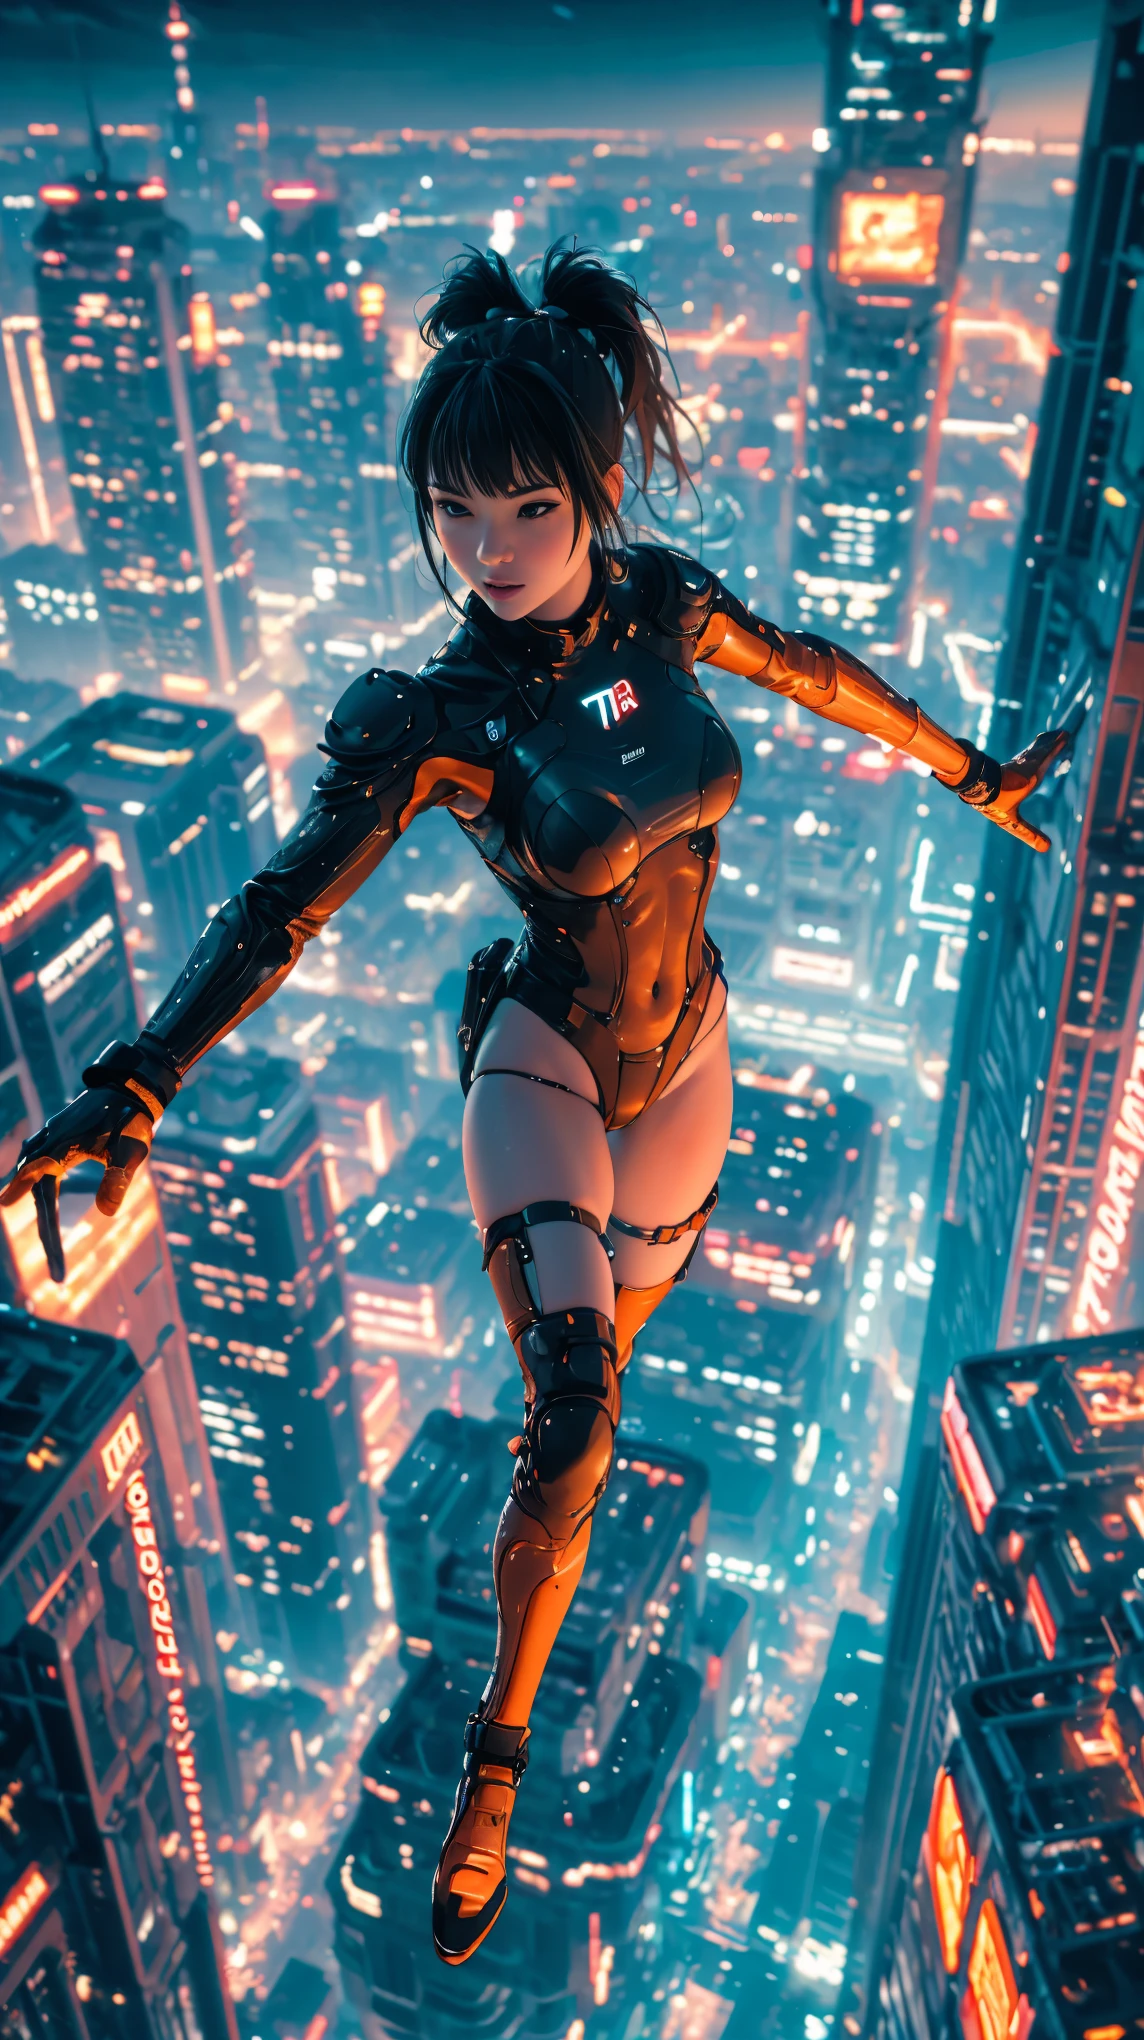 (ultra-detailed, masterpiece:1.2), extremely detailed artwork, best quality, high-resolution, hyper-realistic:1.37, attractive girl, breathtaking leap, background cityscape, realistic lighting, vibrant colors, elegant dress, flowing hair, graceful posture, mesmerizing expression, captivating eyes, delicate facial features, dynamic movement, bustling streets, towering skyscrapers, busy traffic, glowing neon signs, vibrant city life, breathtaking urban scenery, intricate architectural details, vivid city lights, bustling city ambiance, bustling streets, modern cityscape, urban energy